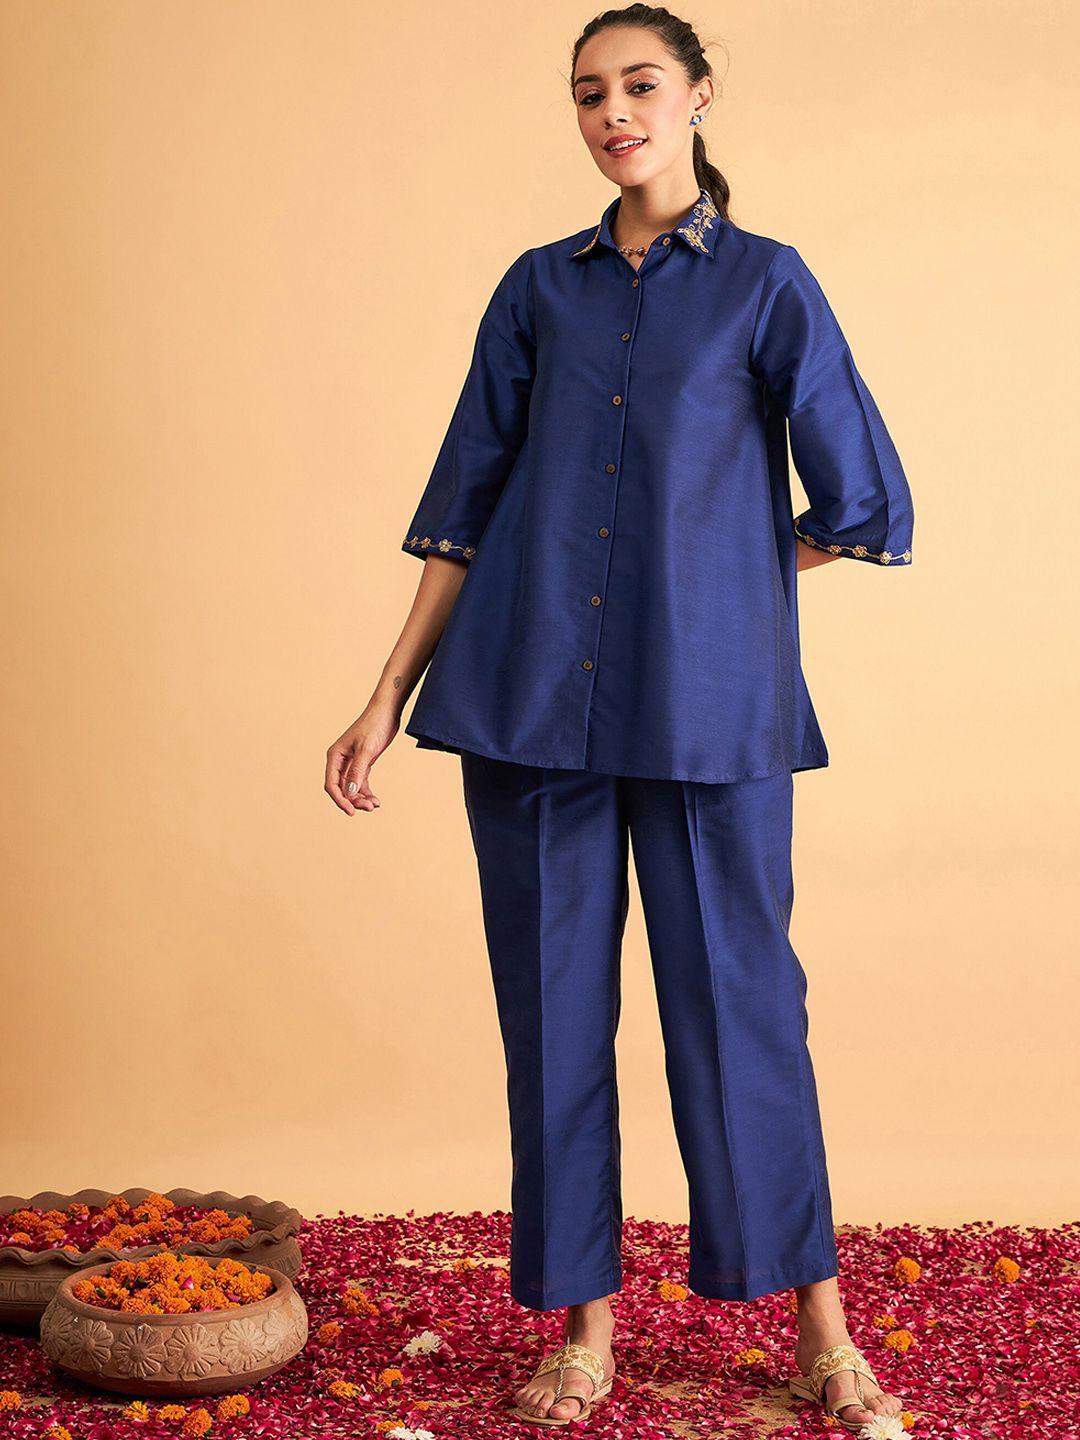 shae by sassafras floral embroidered shirt collar shirt & trousers